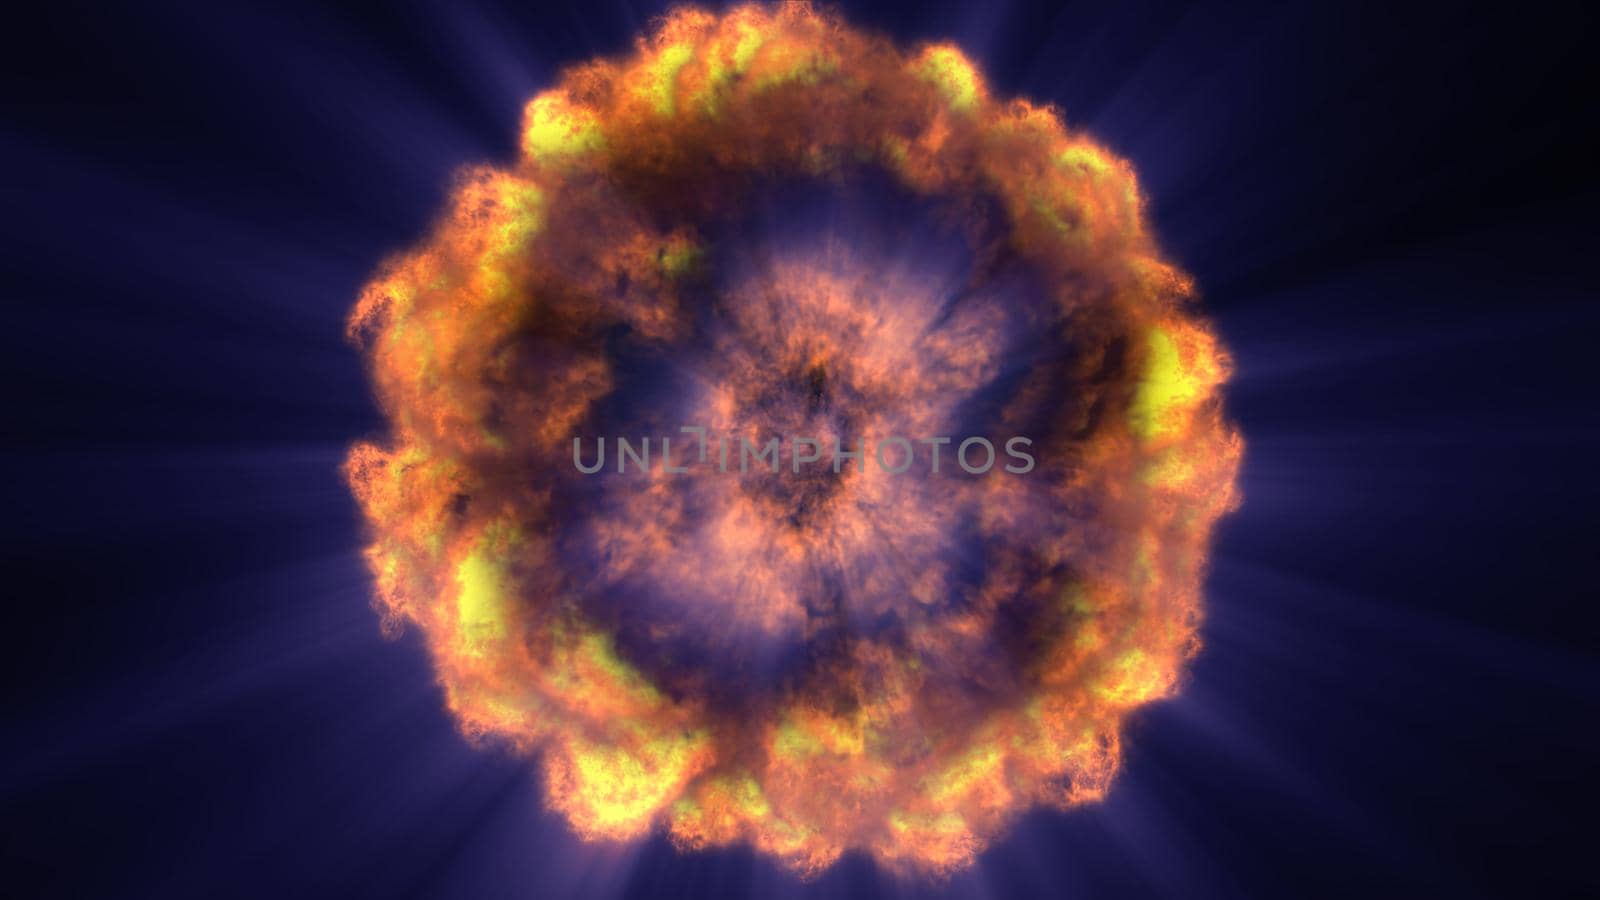 fire flame ball explosion in space, abstract illustration